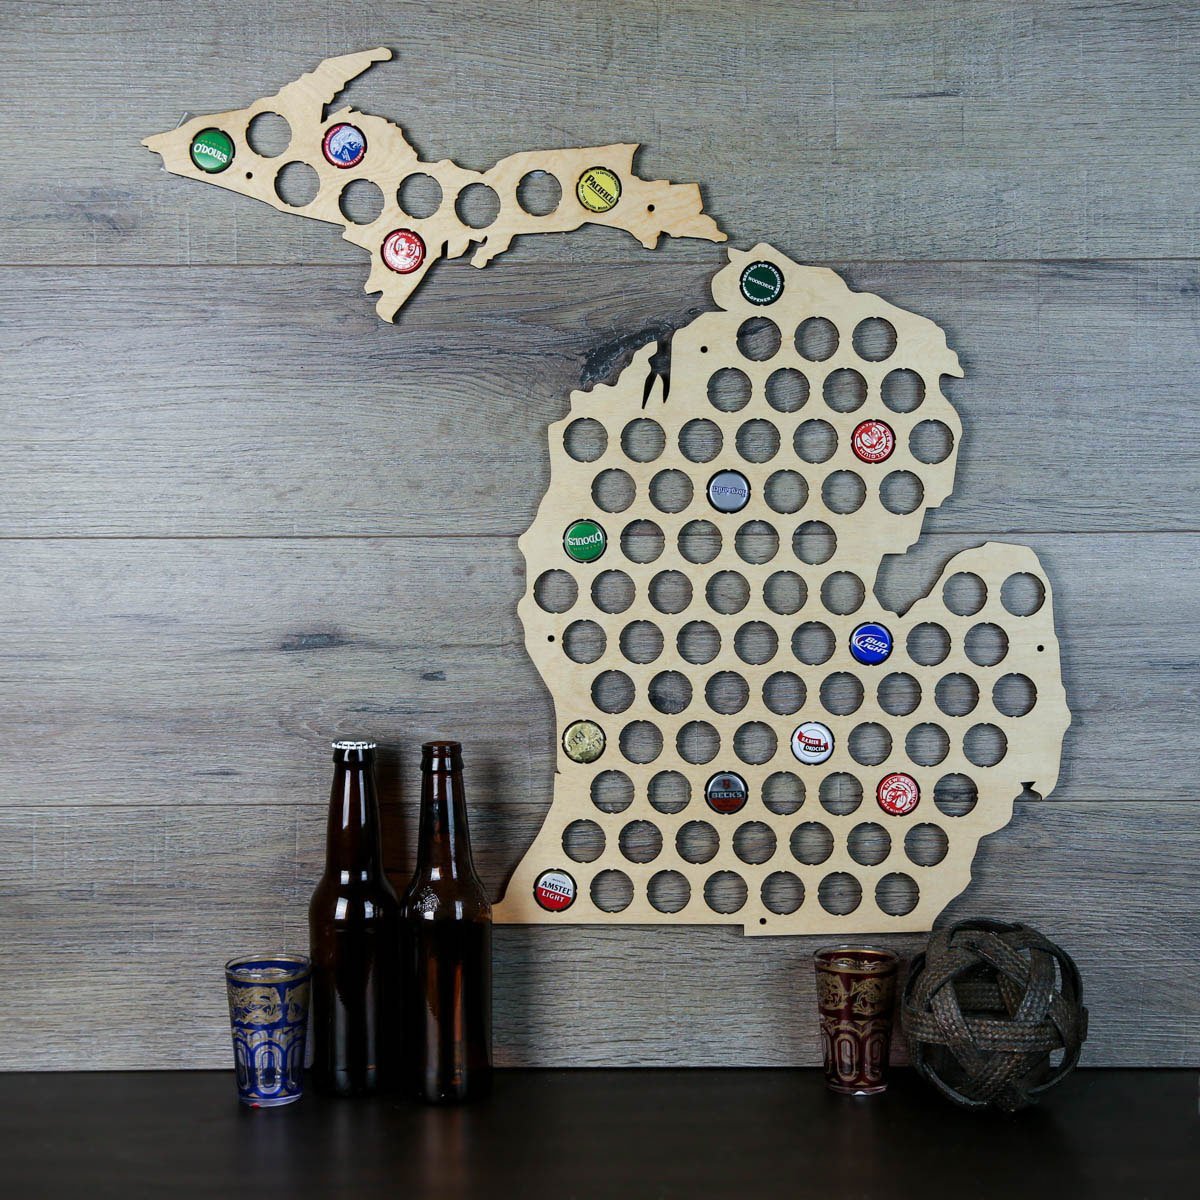 ALL BEER CAP TRAPS